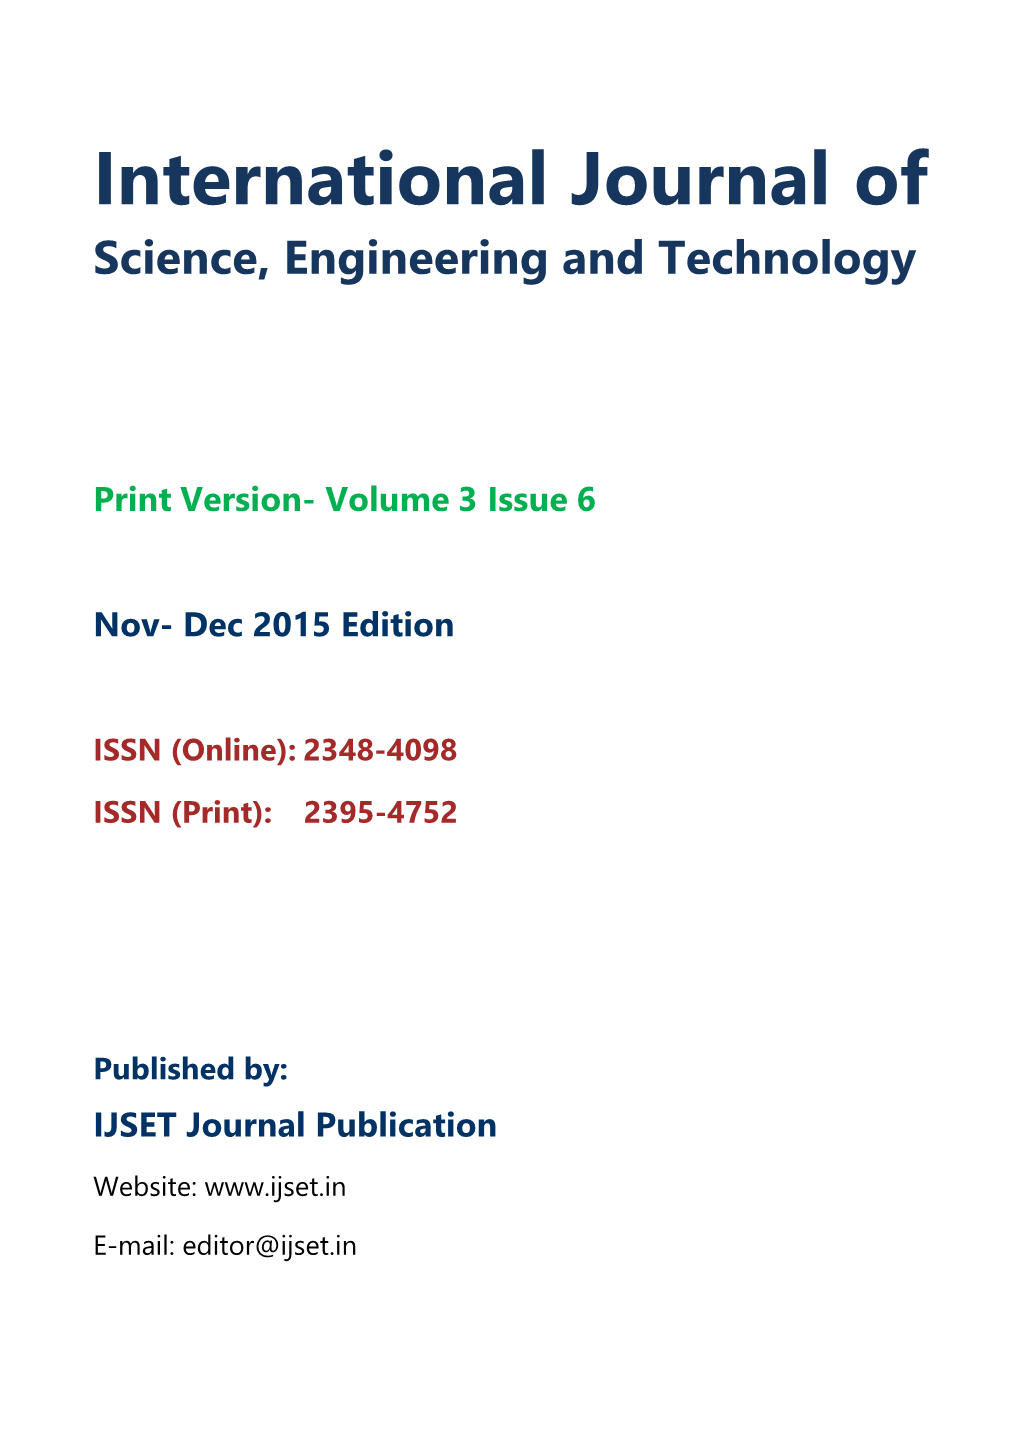 International Journal of Science Engineering and Technology